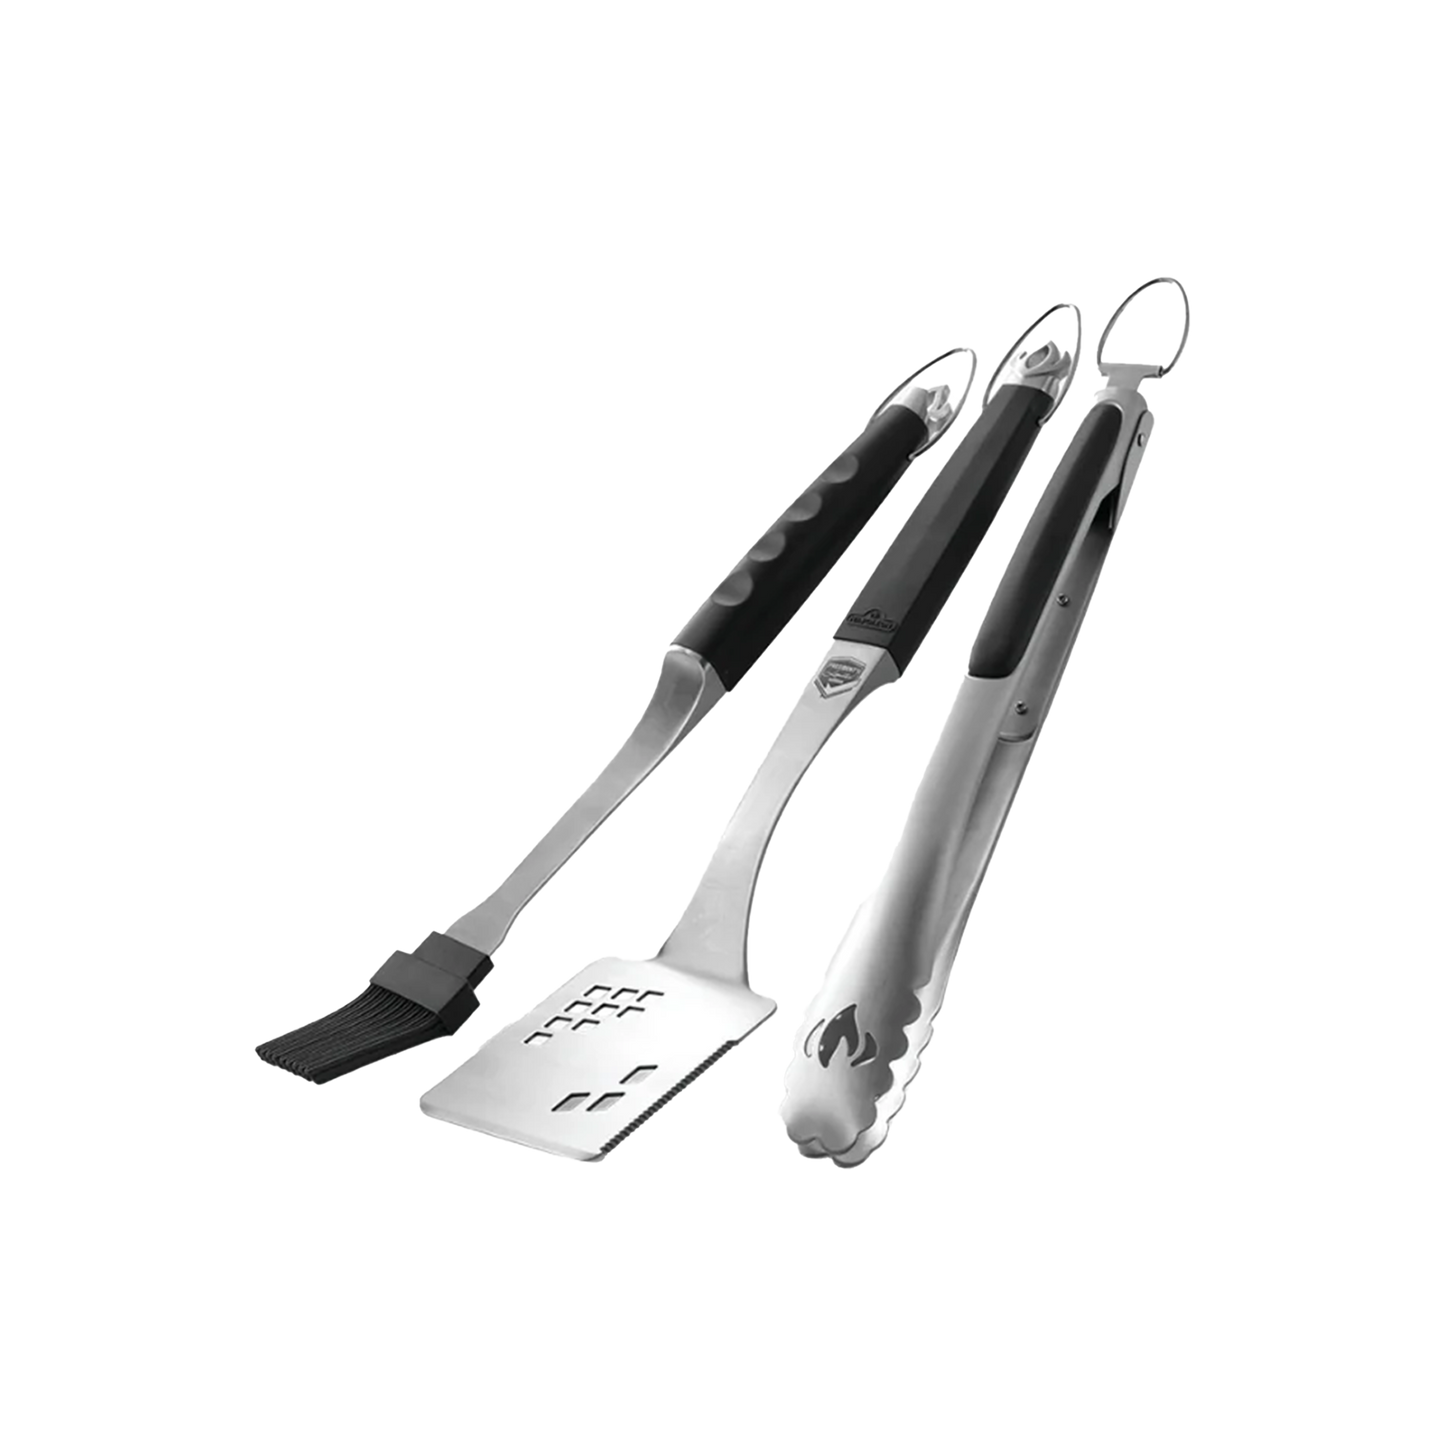 Executive 3 Piece Toolset - Stainless Steel